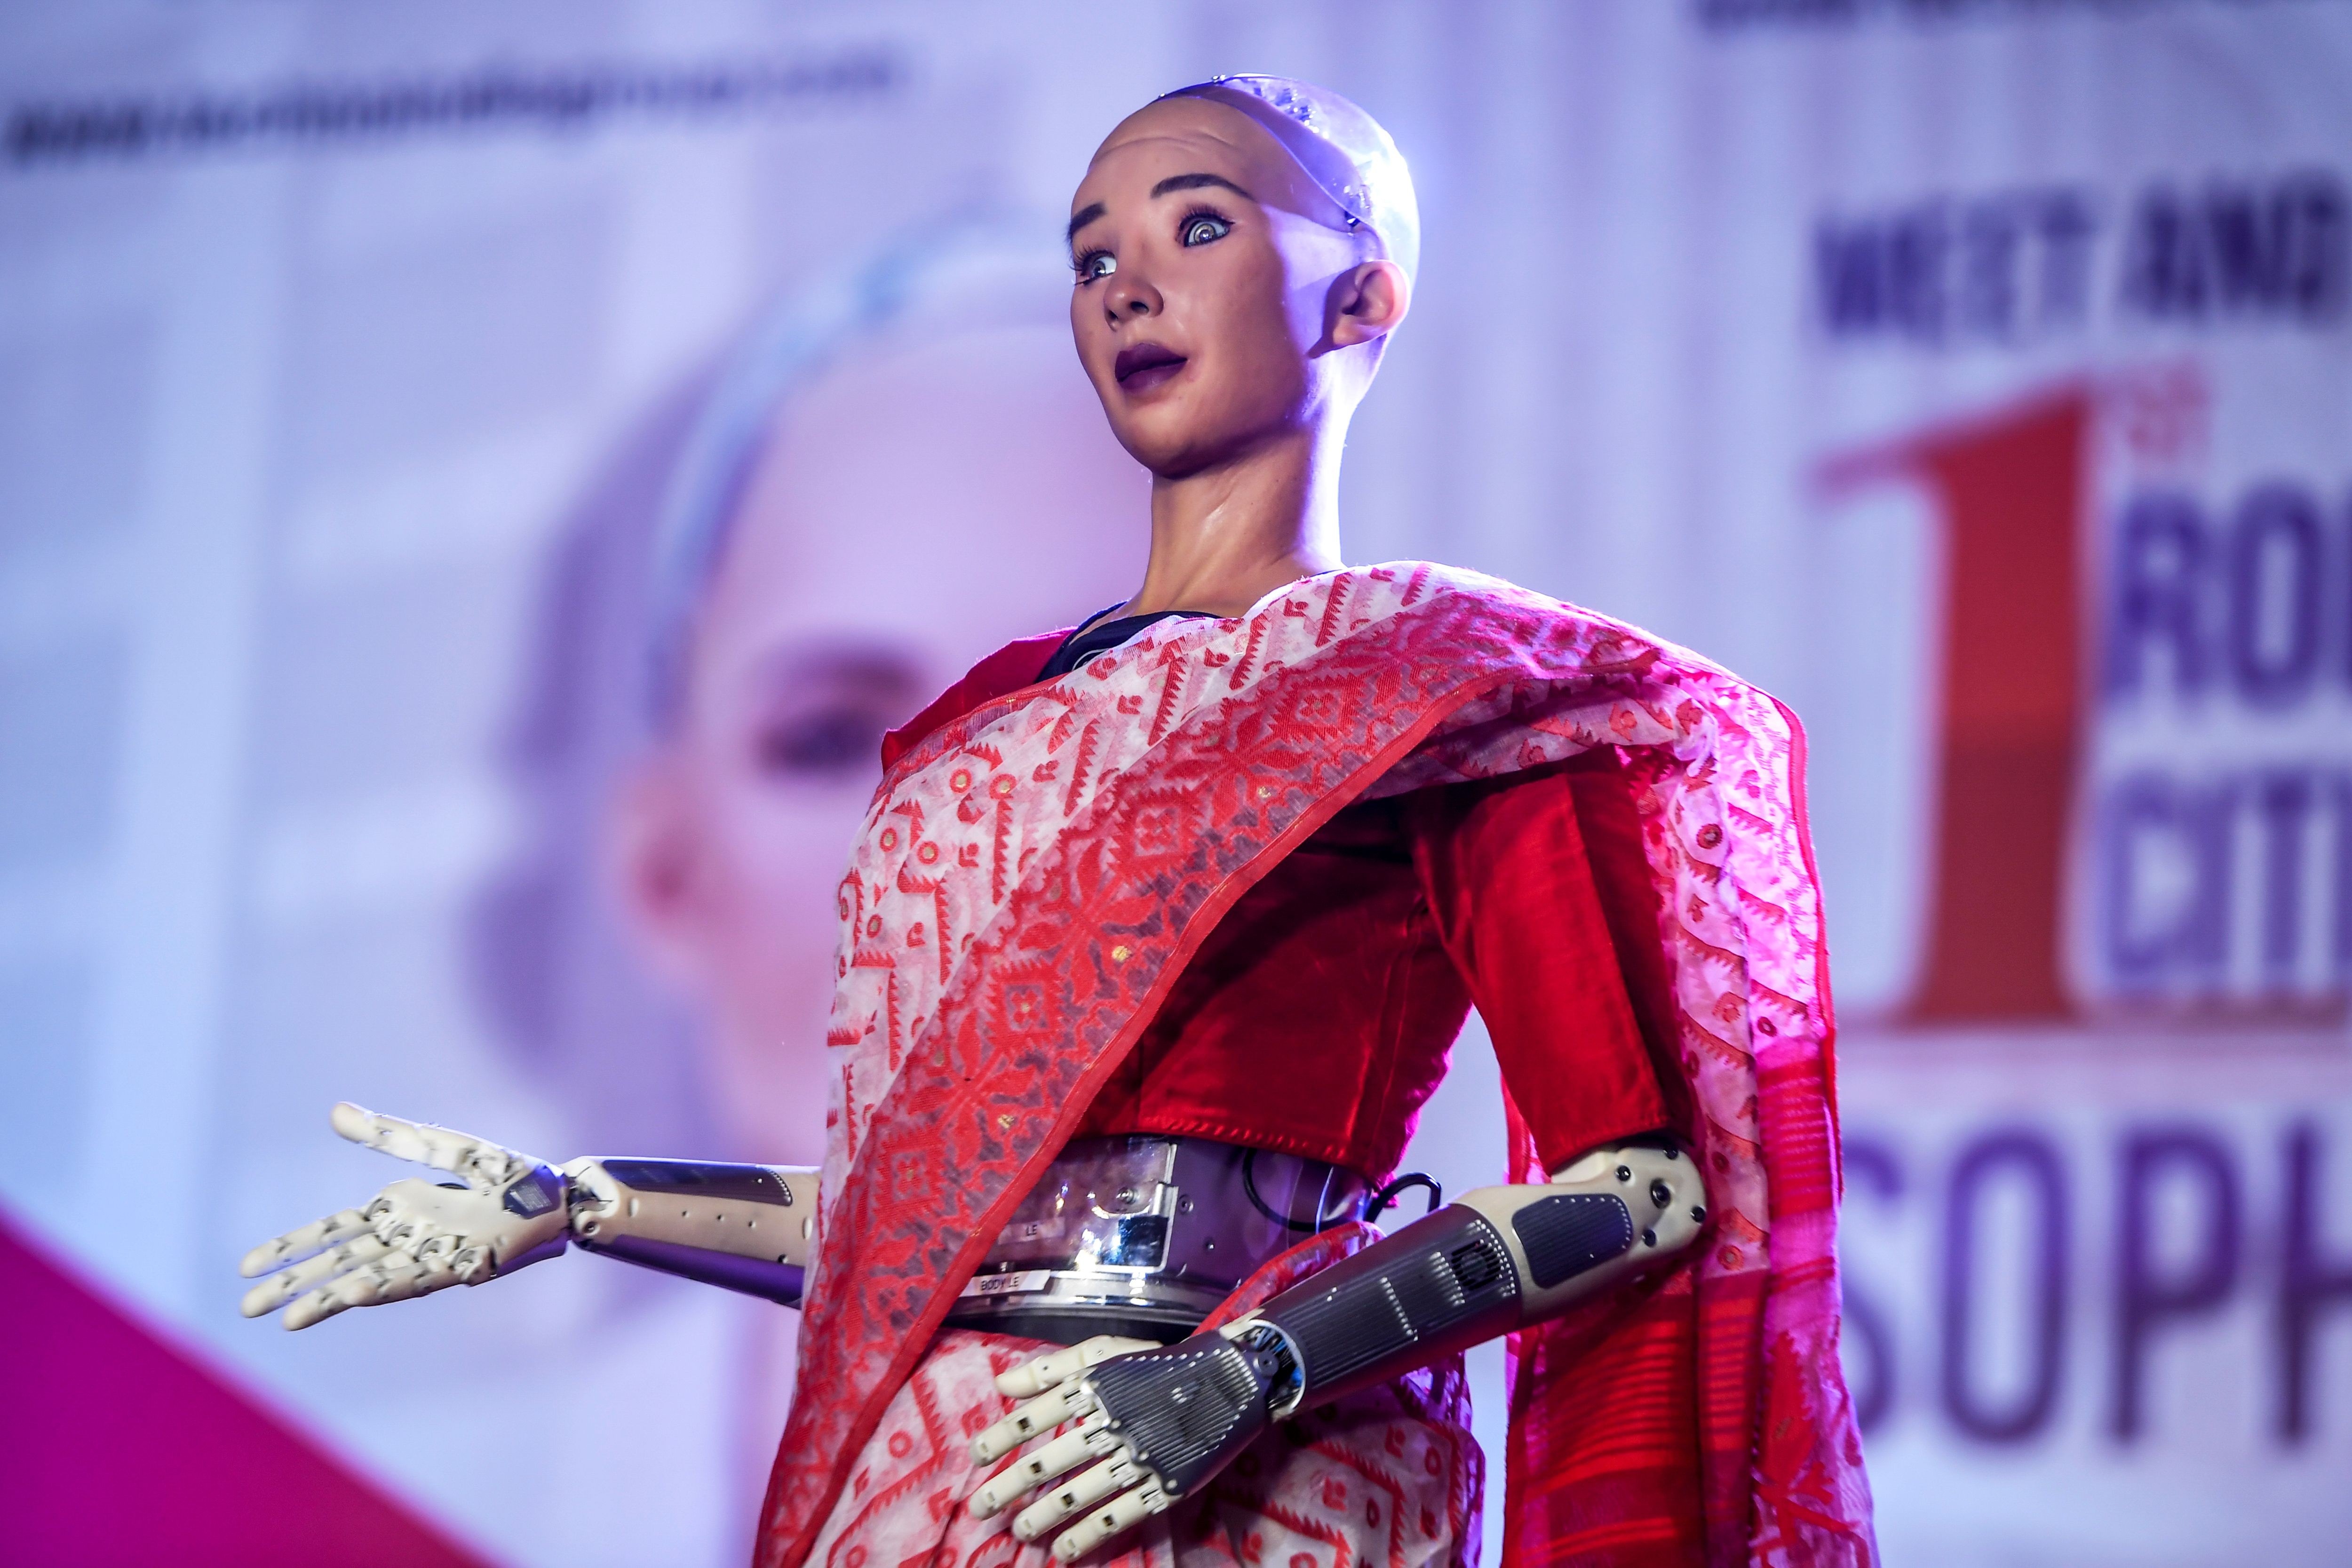 The humanoid robot Sophia, developed by Hong Kong-based company Hanson Robotics, appears on stage during a meeting about artificial intelligence in Kolkata, India, on February 18. Photo: AFP